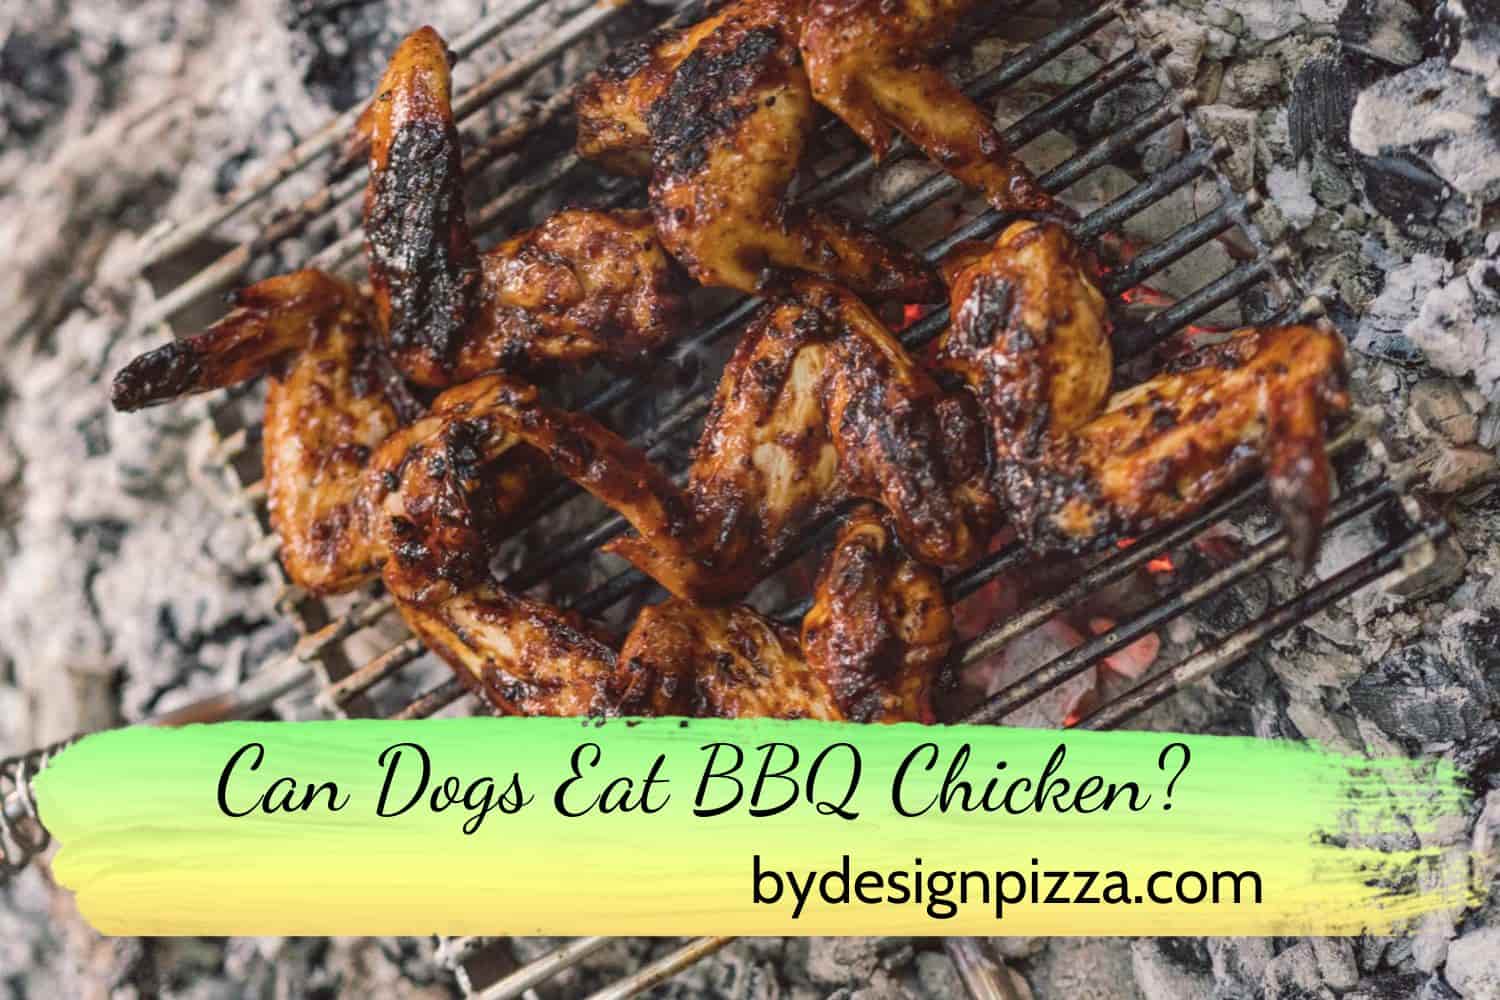 Can Dogs Eat BBQ Chicken